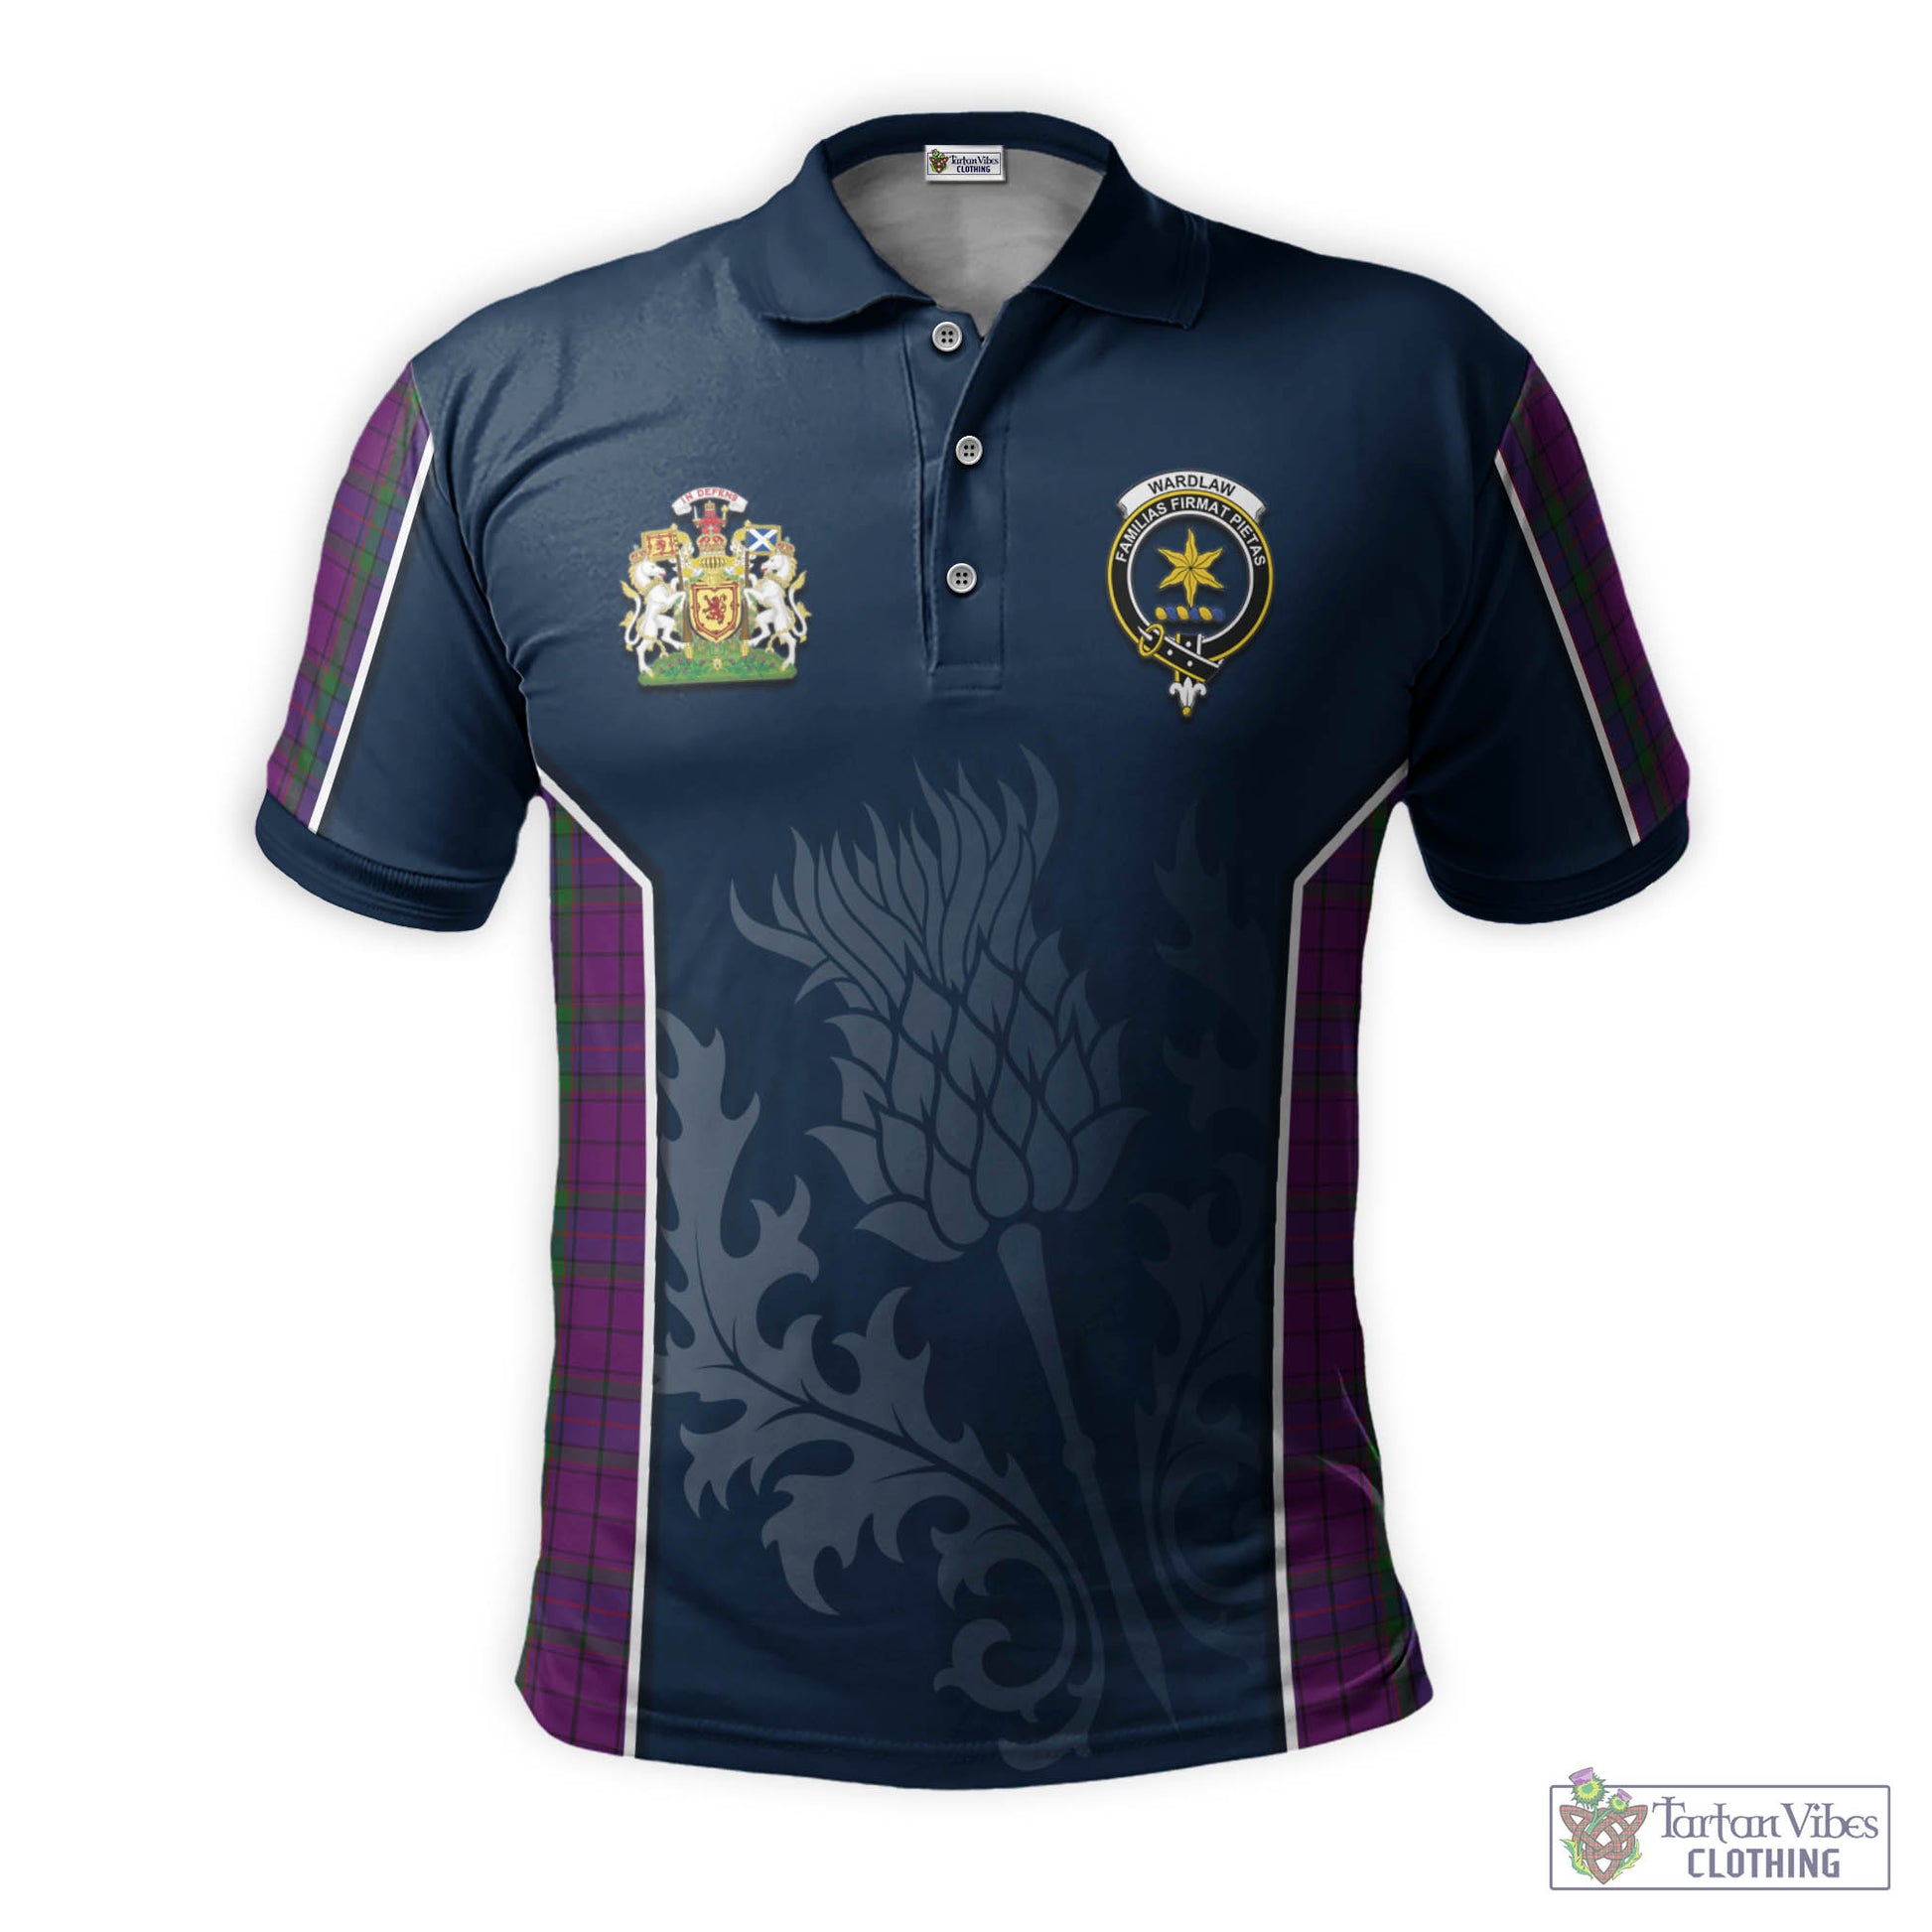 Tartan Vibes Clothing Wardlaw Tartan Men's Polo Shirt with Family Crest and Scottish Thistle Vibes Sport Style